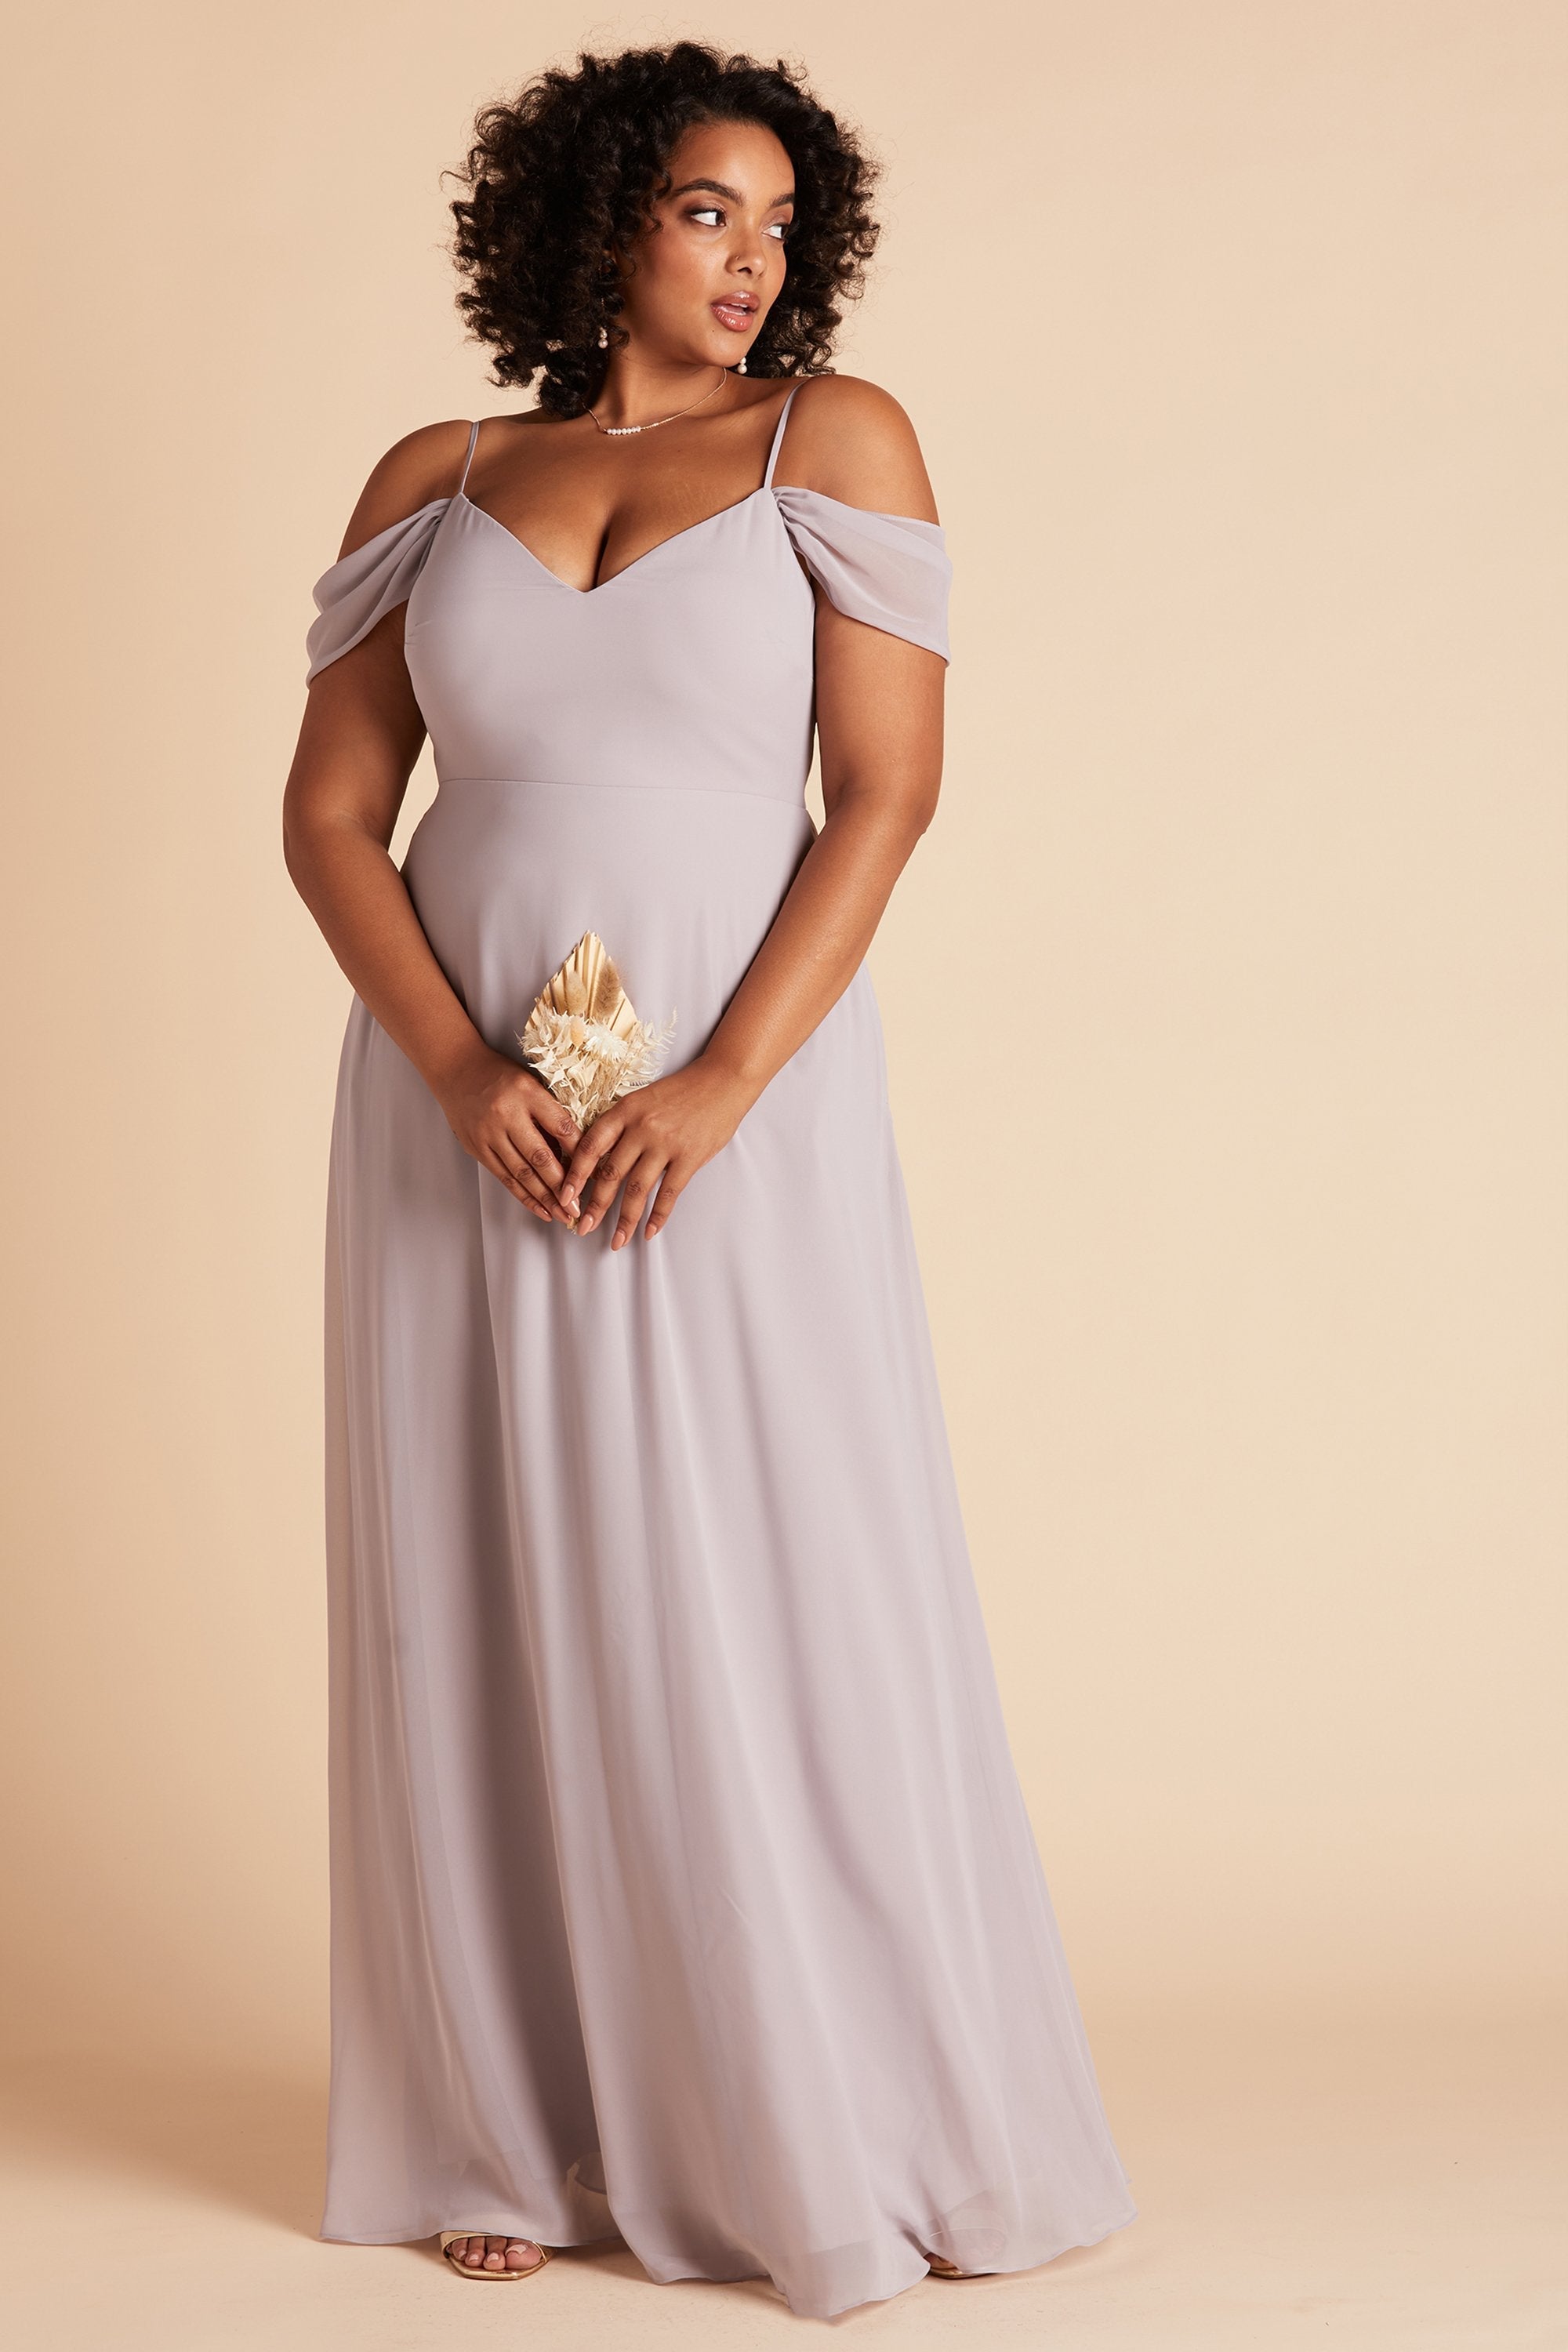 Devin convertible plus size bridesmaids dress in lilac purple chiffon by Birdy Grey, front view